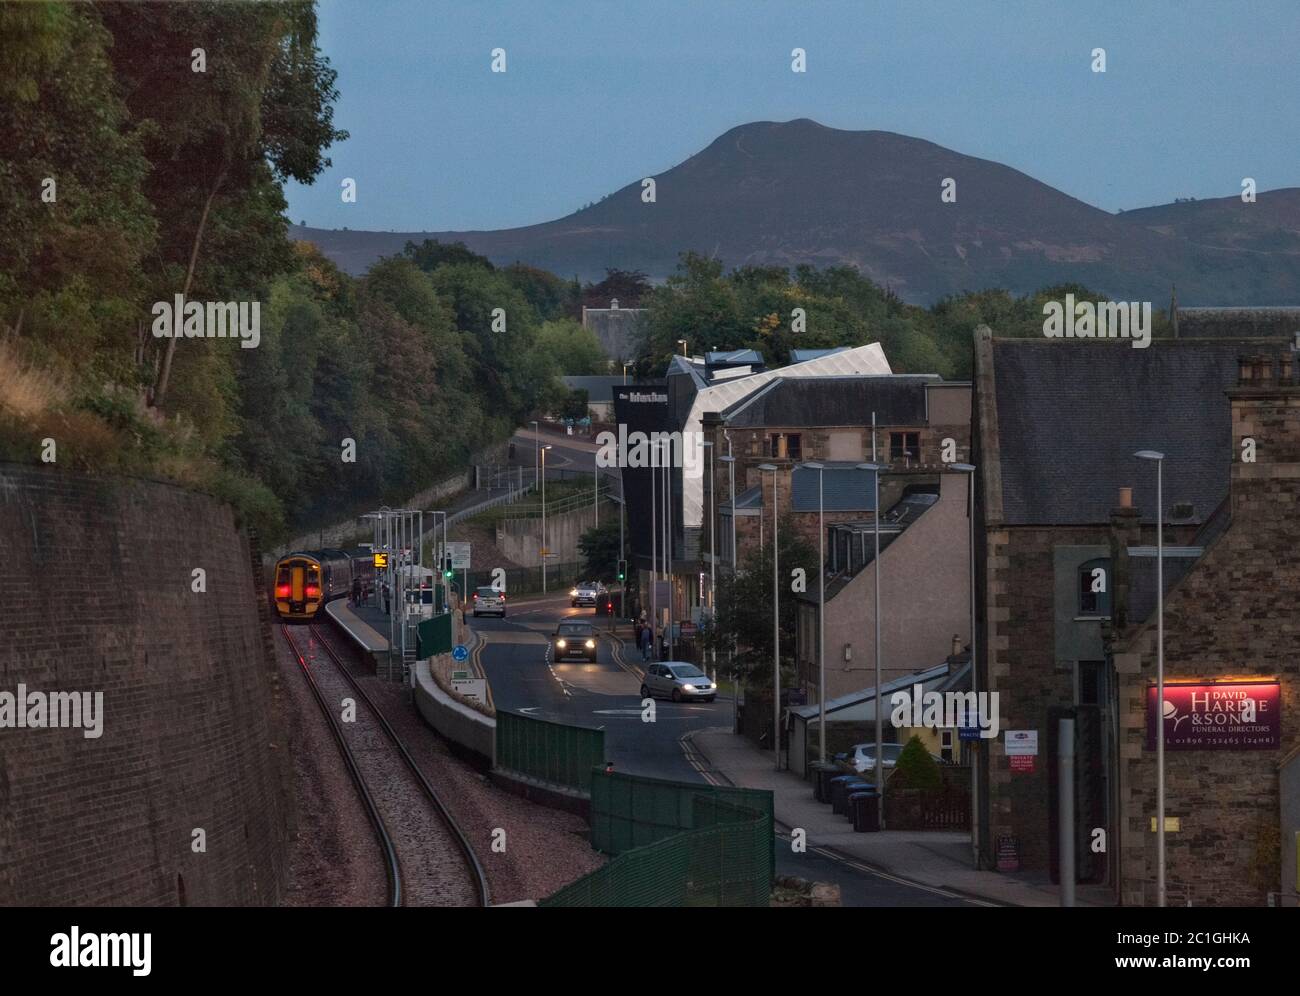 Scotrail class 158 train calling at Galashiels railway station in the Scottish borders on the reopened borders railway line Stock Photo